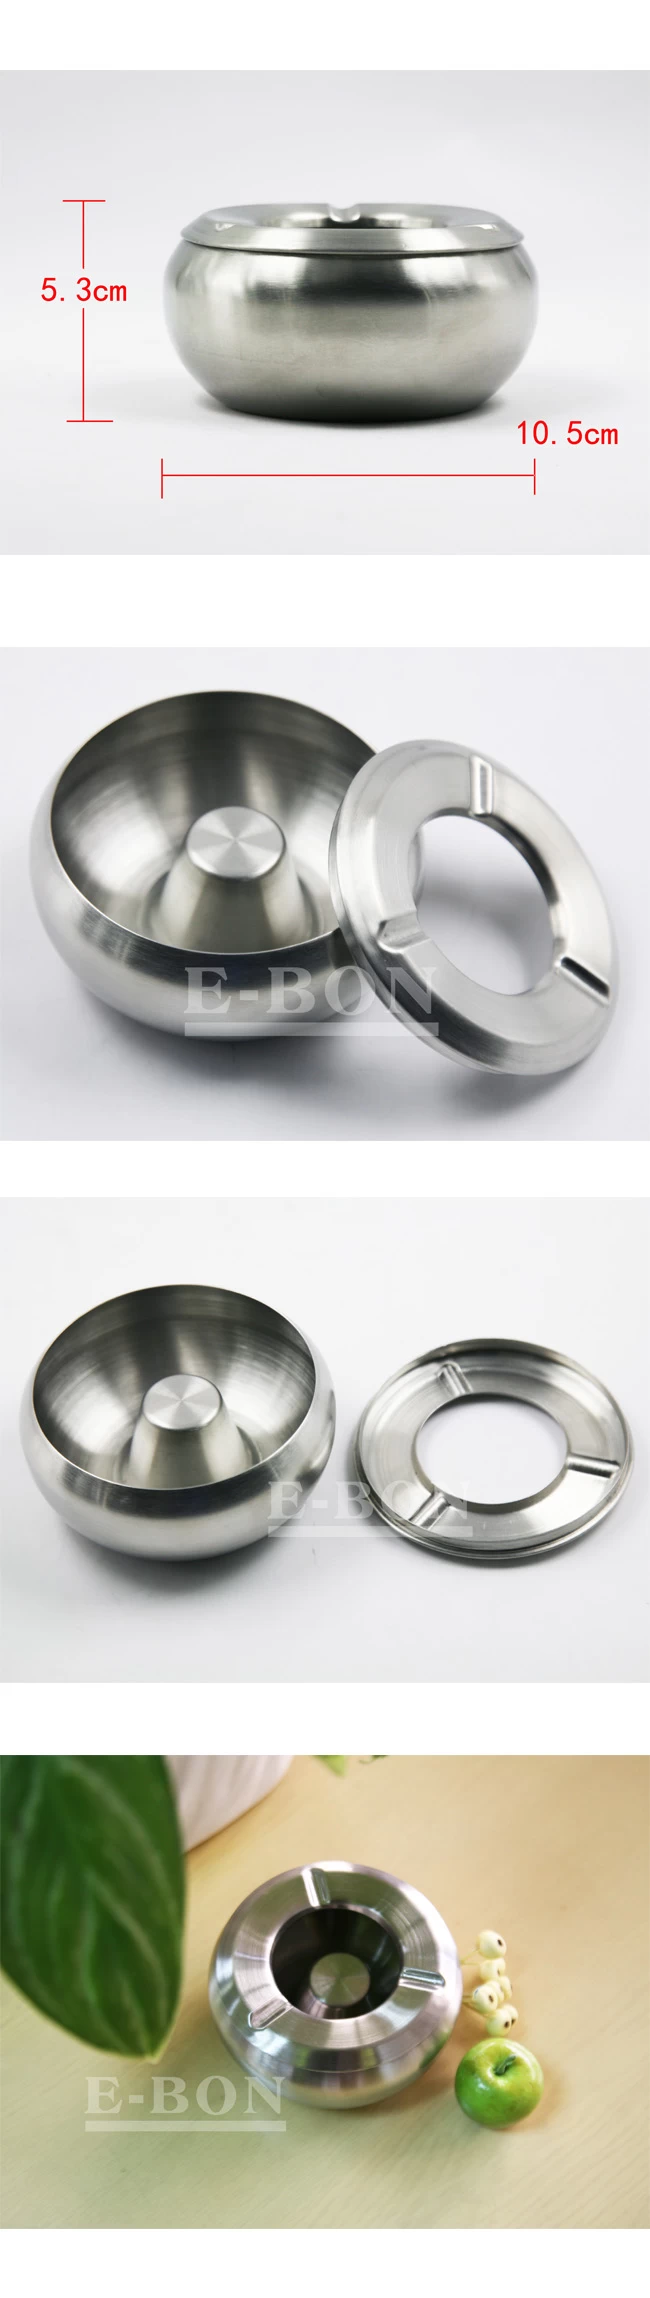 stainless steel ashtray